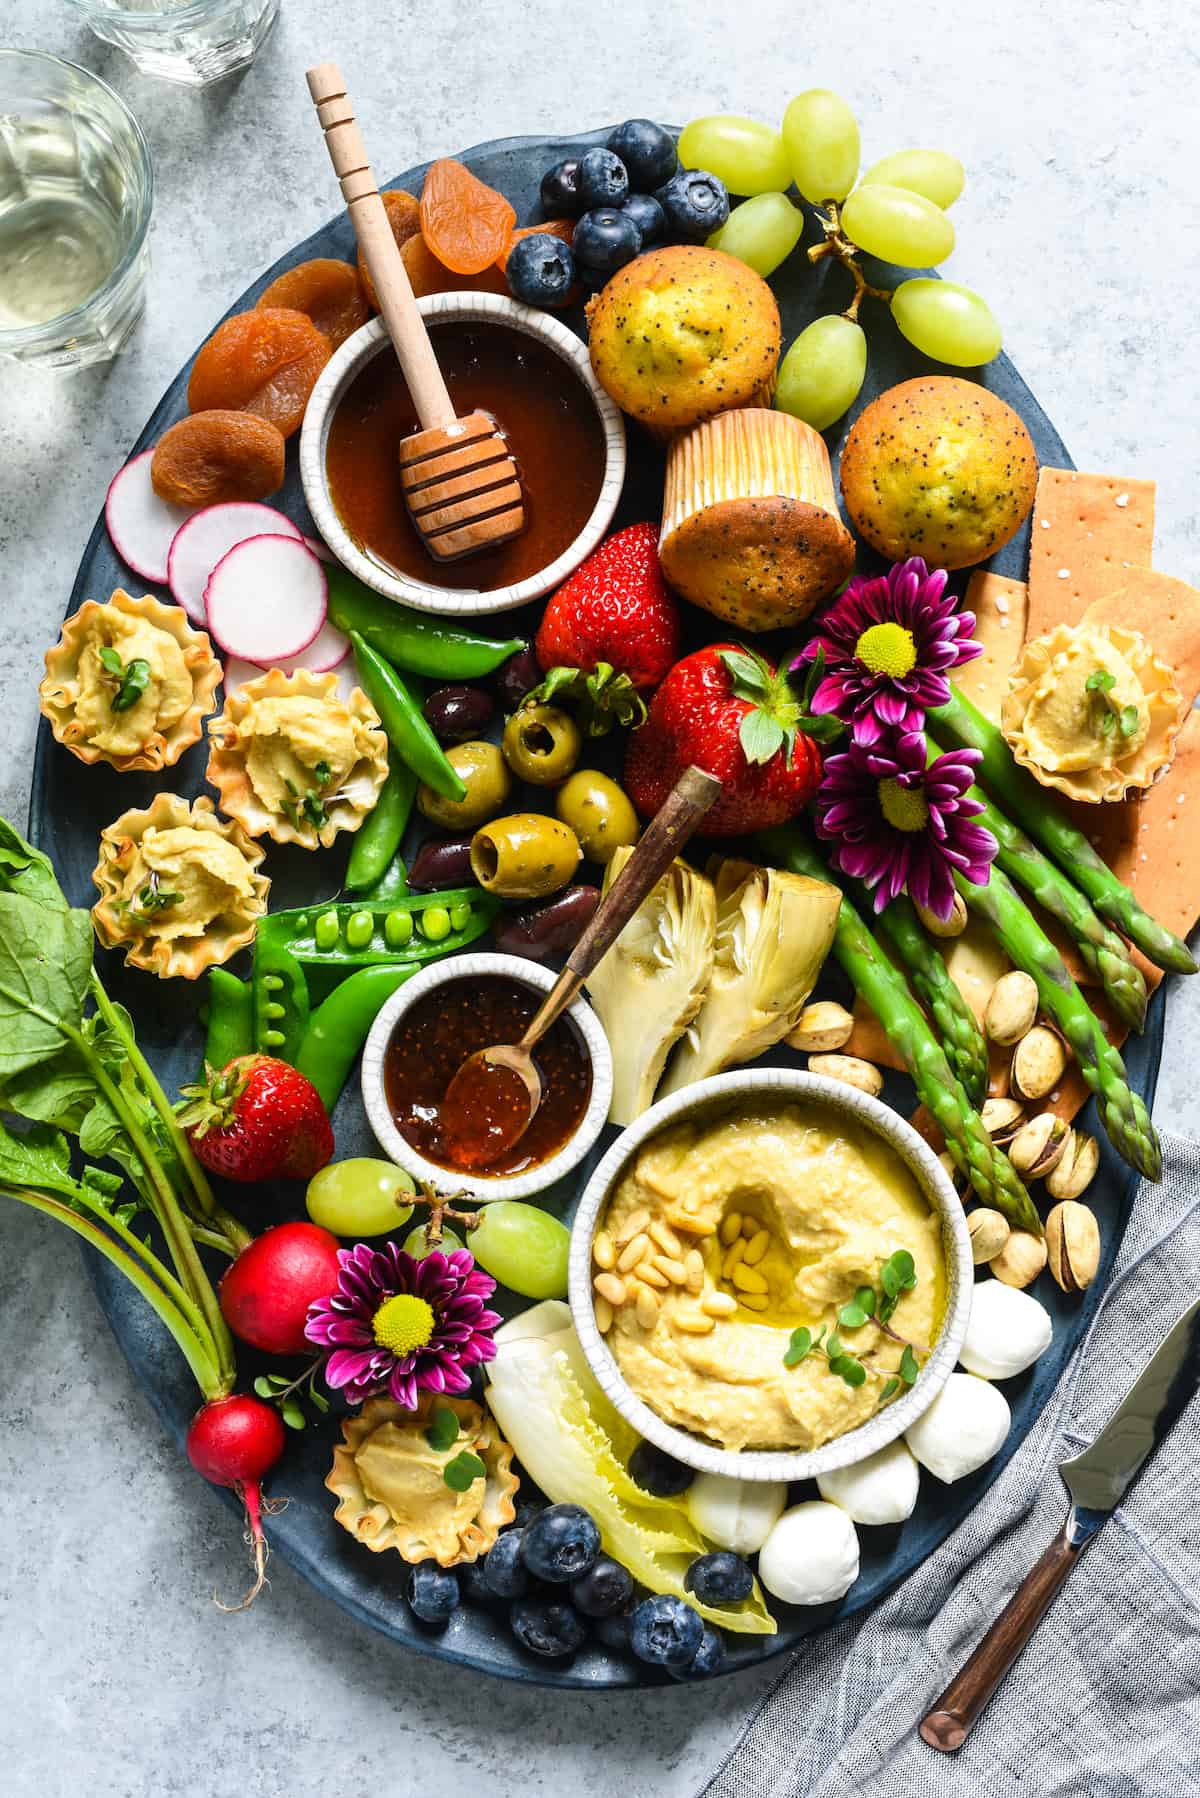 Spring Snack Platter with Hummus Phyllo Bites - A fresh, satisfying unofficial meal filled with seasonal produce and fun goodies. | foxeslovelemons.com